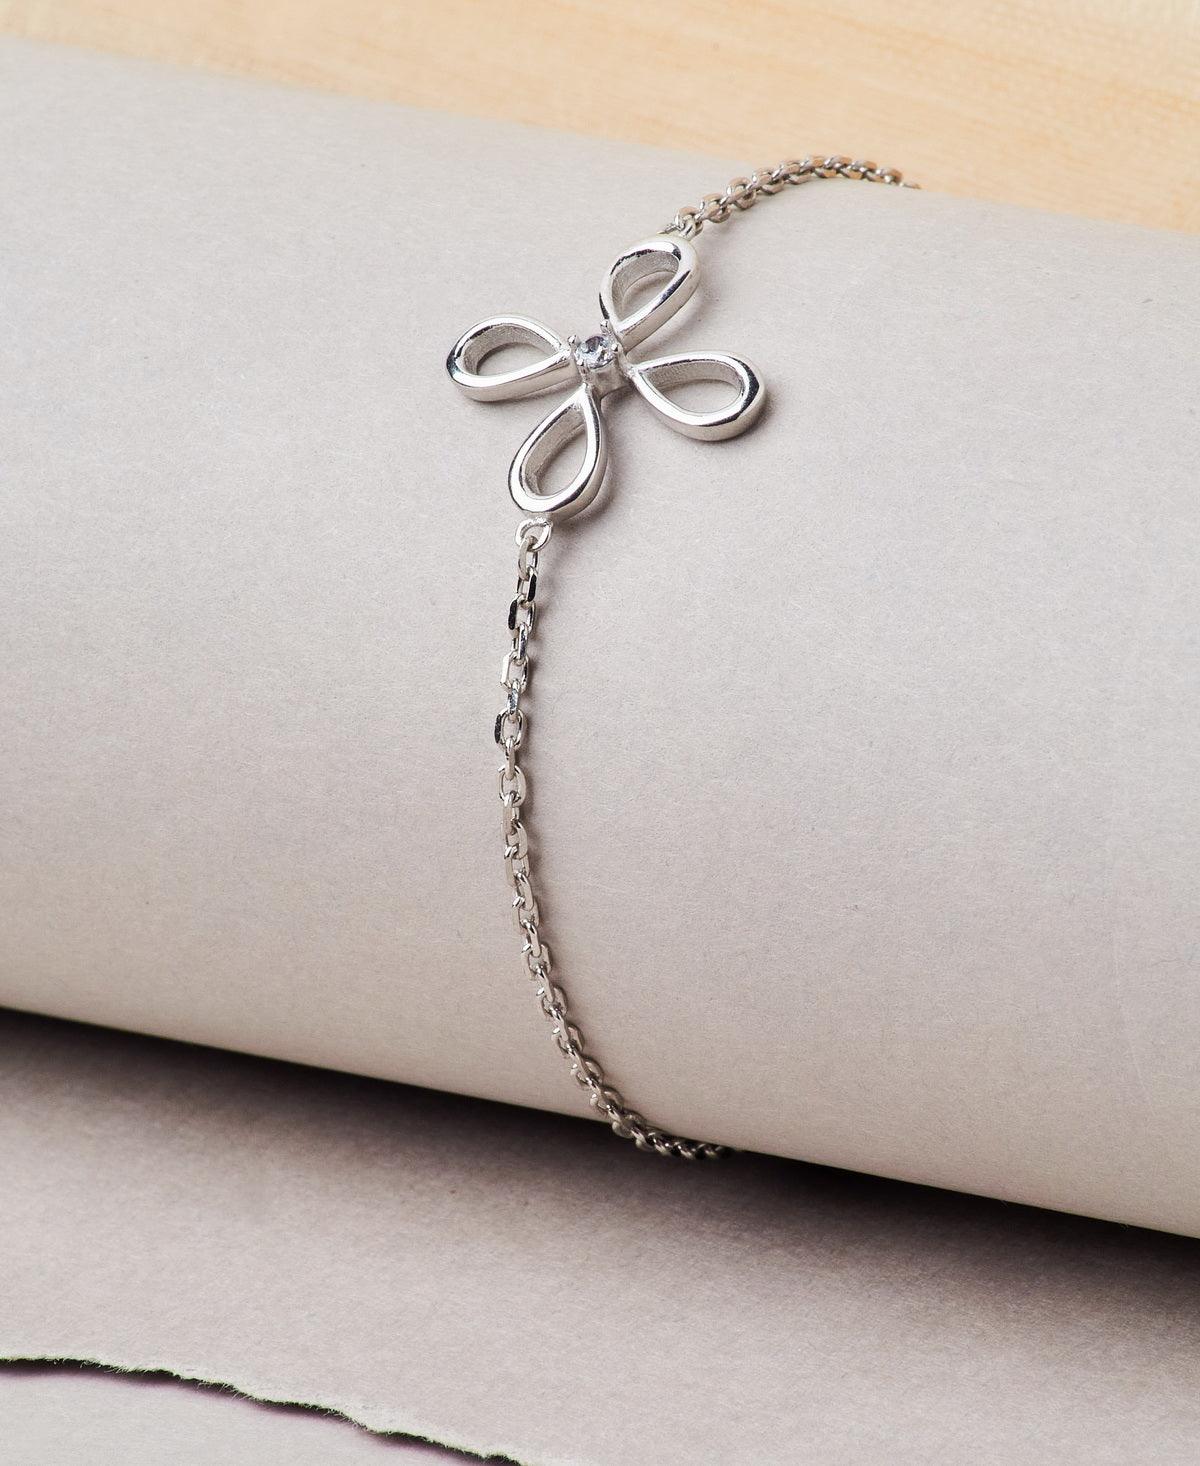 Fashionable Floral Stone Studded Silver Bracelet. - Chandrani Pearls